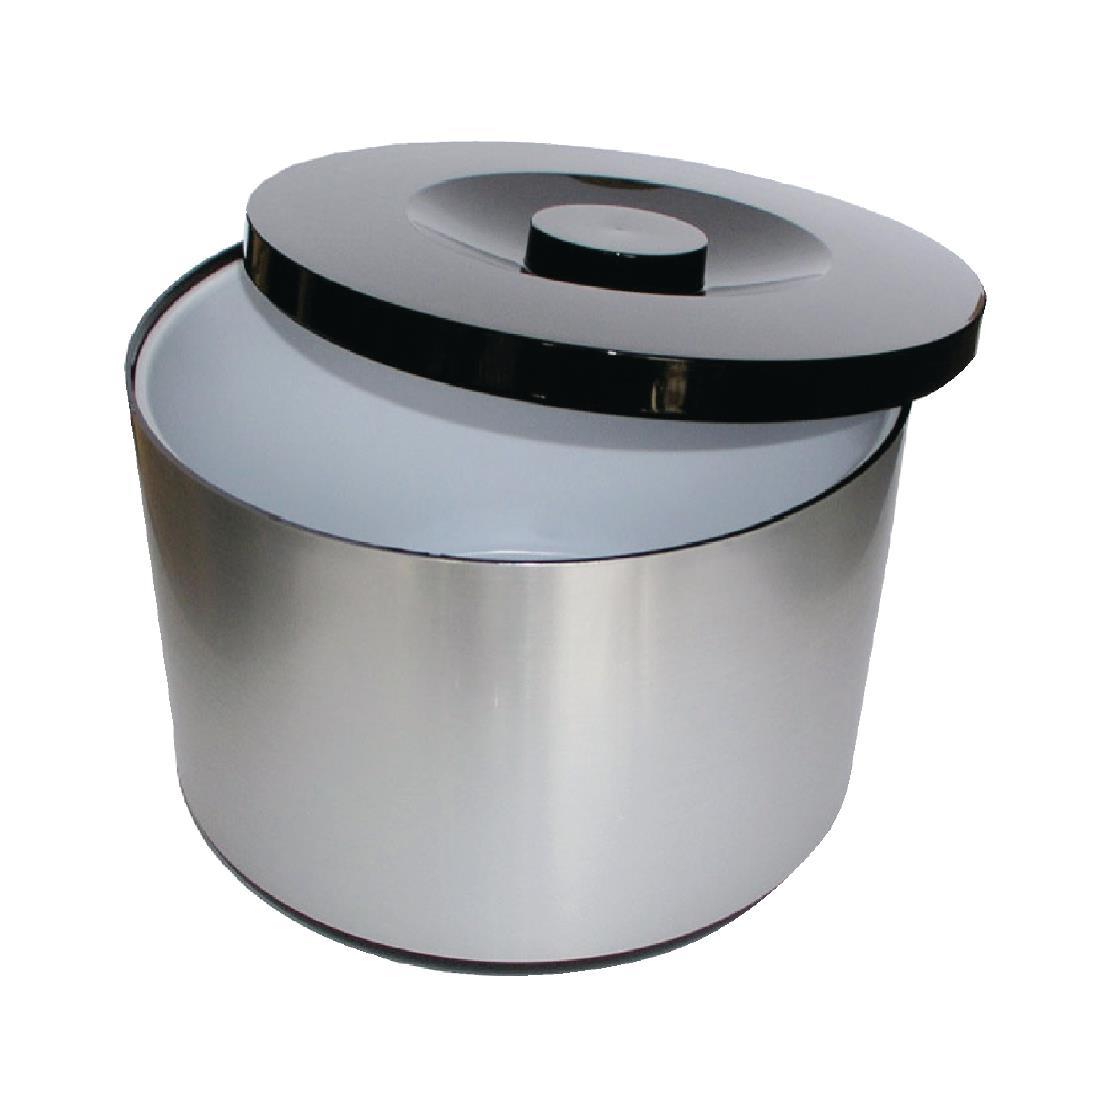 Beaumont Insulated Ice Bucket with Lid 10 Ltr - D848  - 1